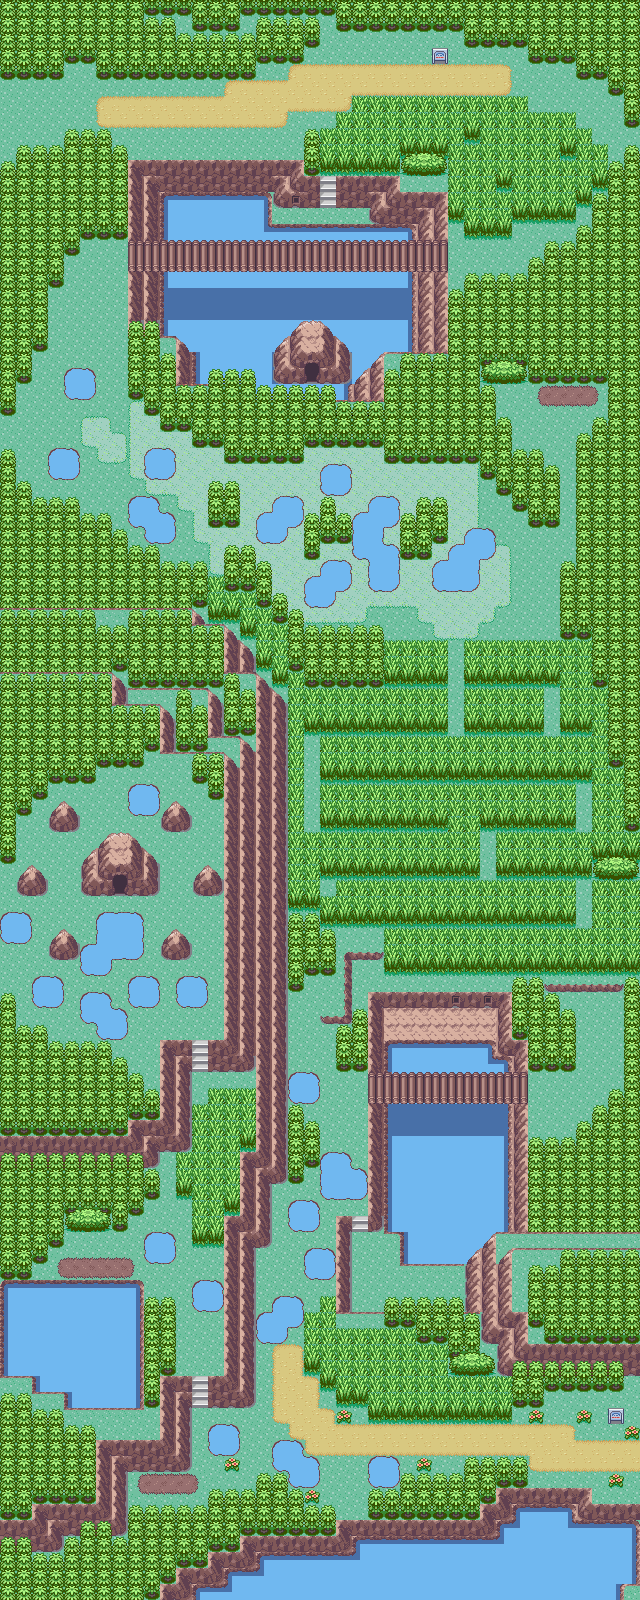 Pokémon Ruby and Sapphire/Route 120 — StrategyWiki, video game walkthrough and strategy wiki